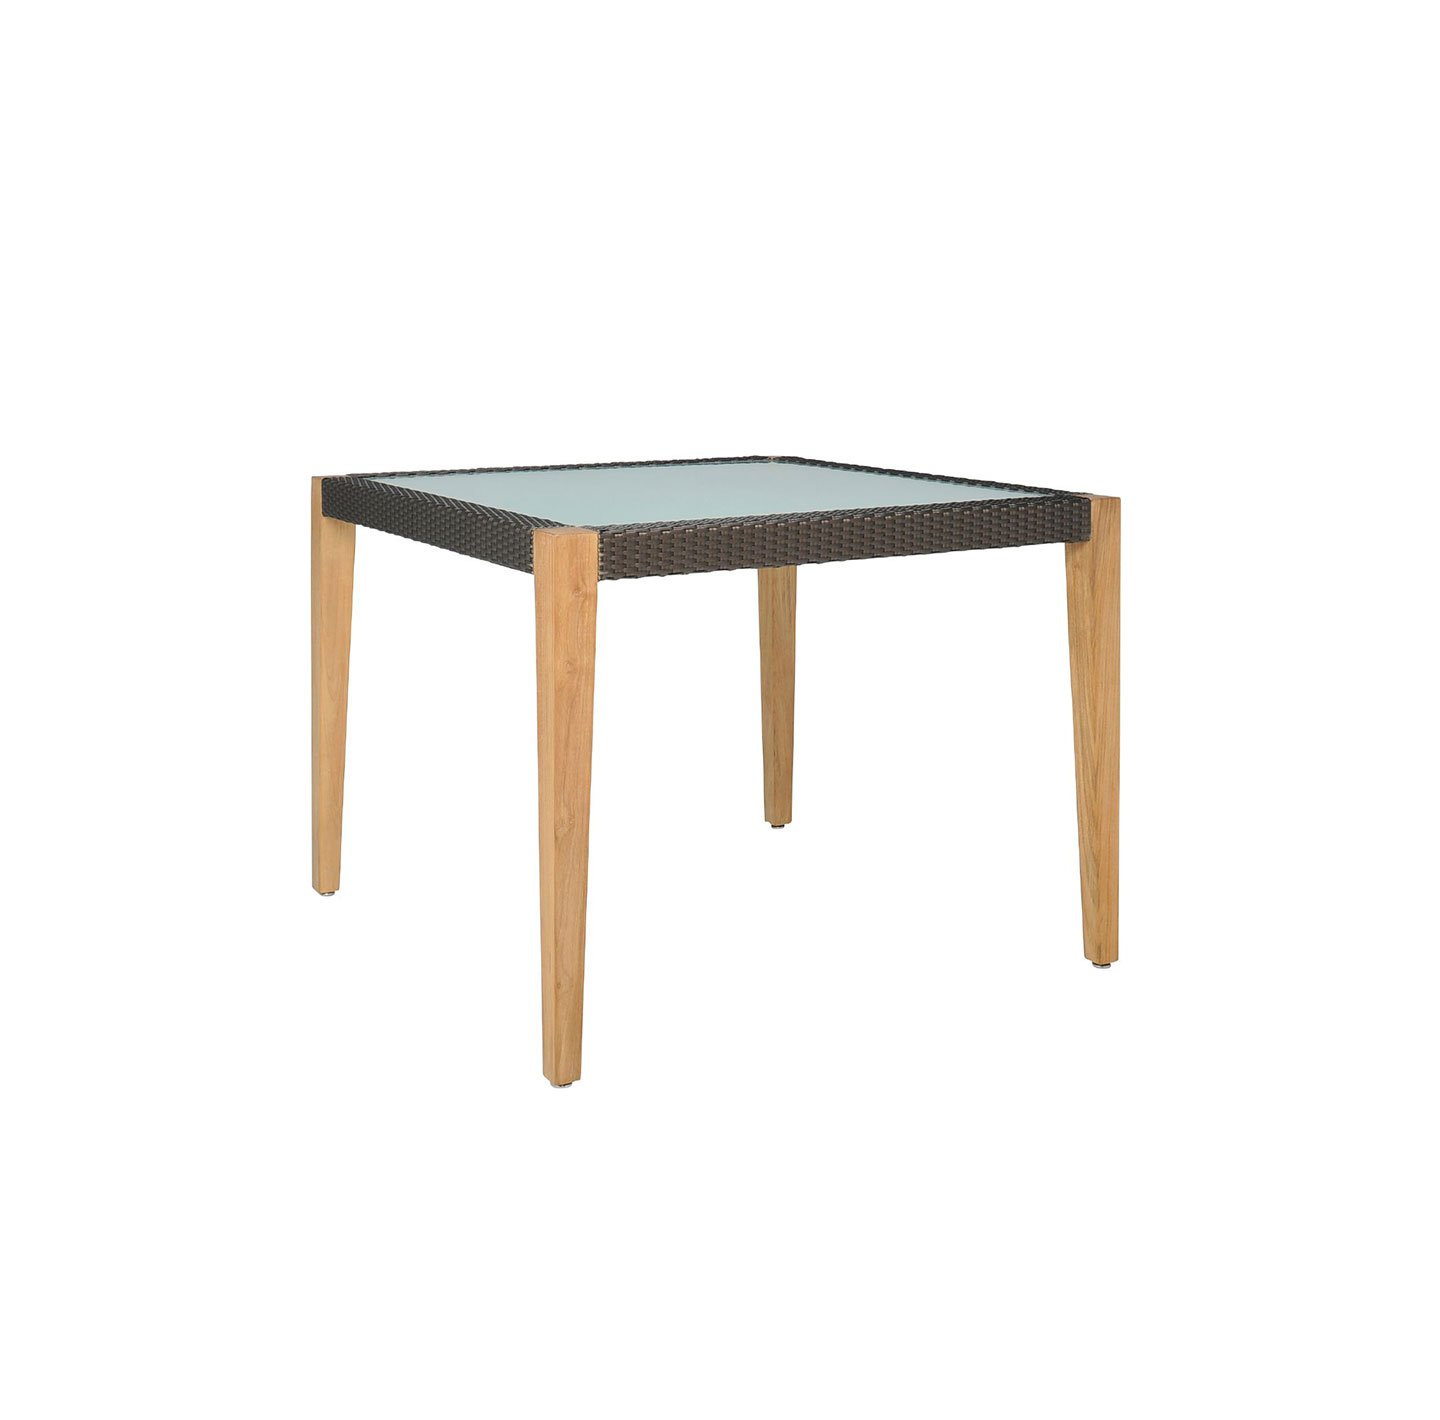 Haworth Quinta table with 4 wood legs and janusfiber trip with glass center